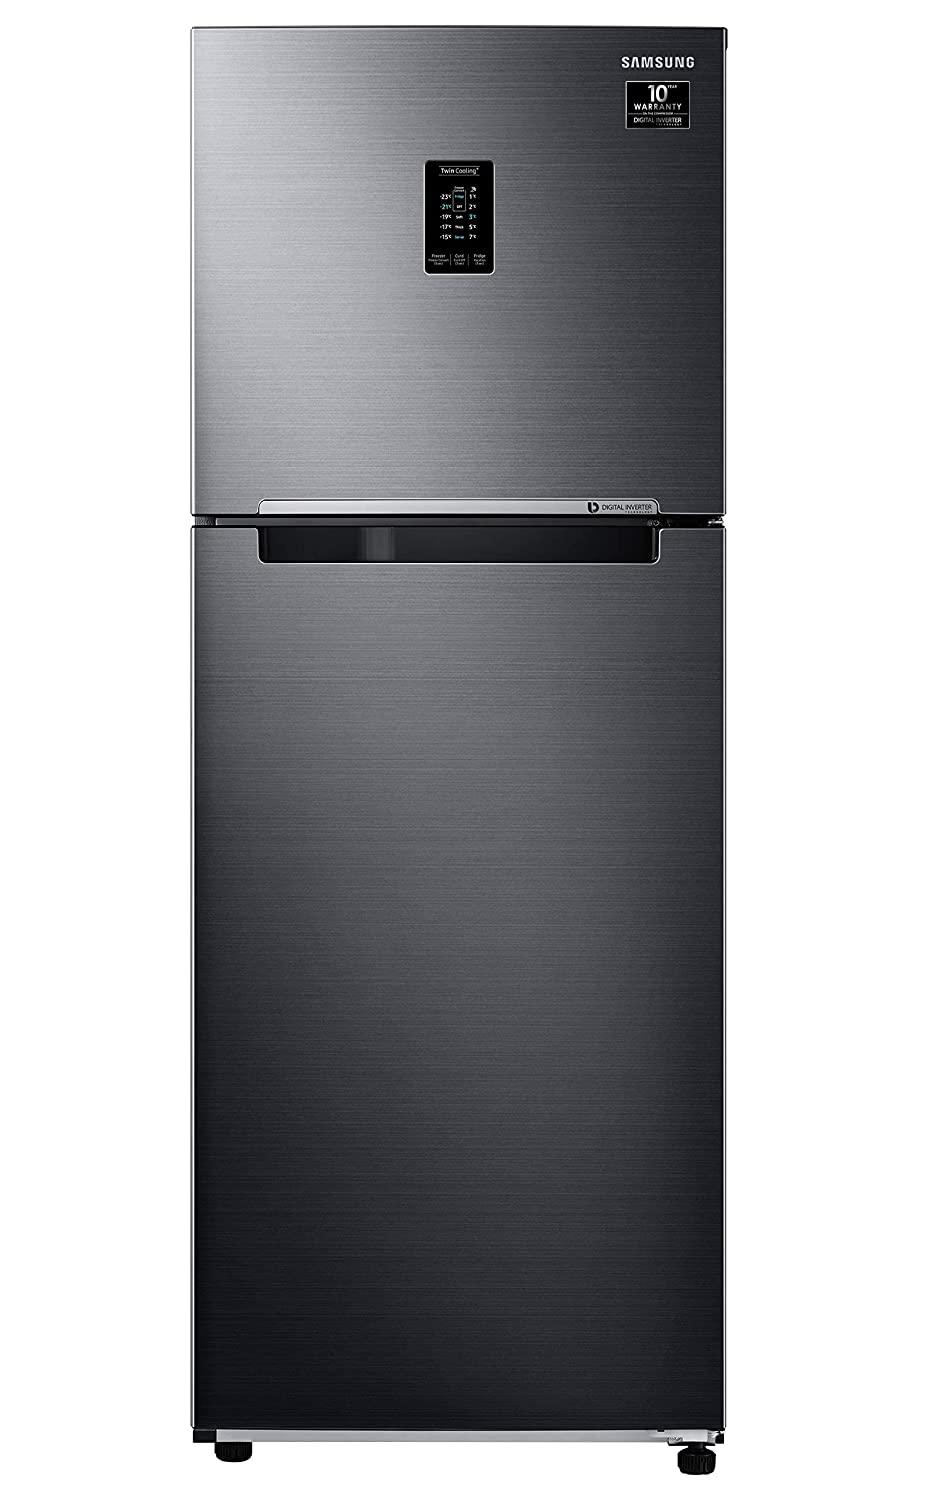 (Renewed) Samsung 314 L 2 Star Inverter Frost-Free Double Door Refrigerator (RT34A4622BX/HL, Luxe Black, Curd Maestro, Convertible)